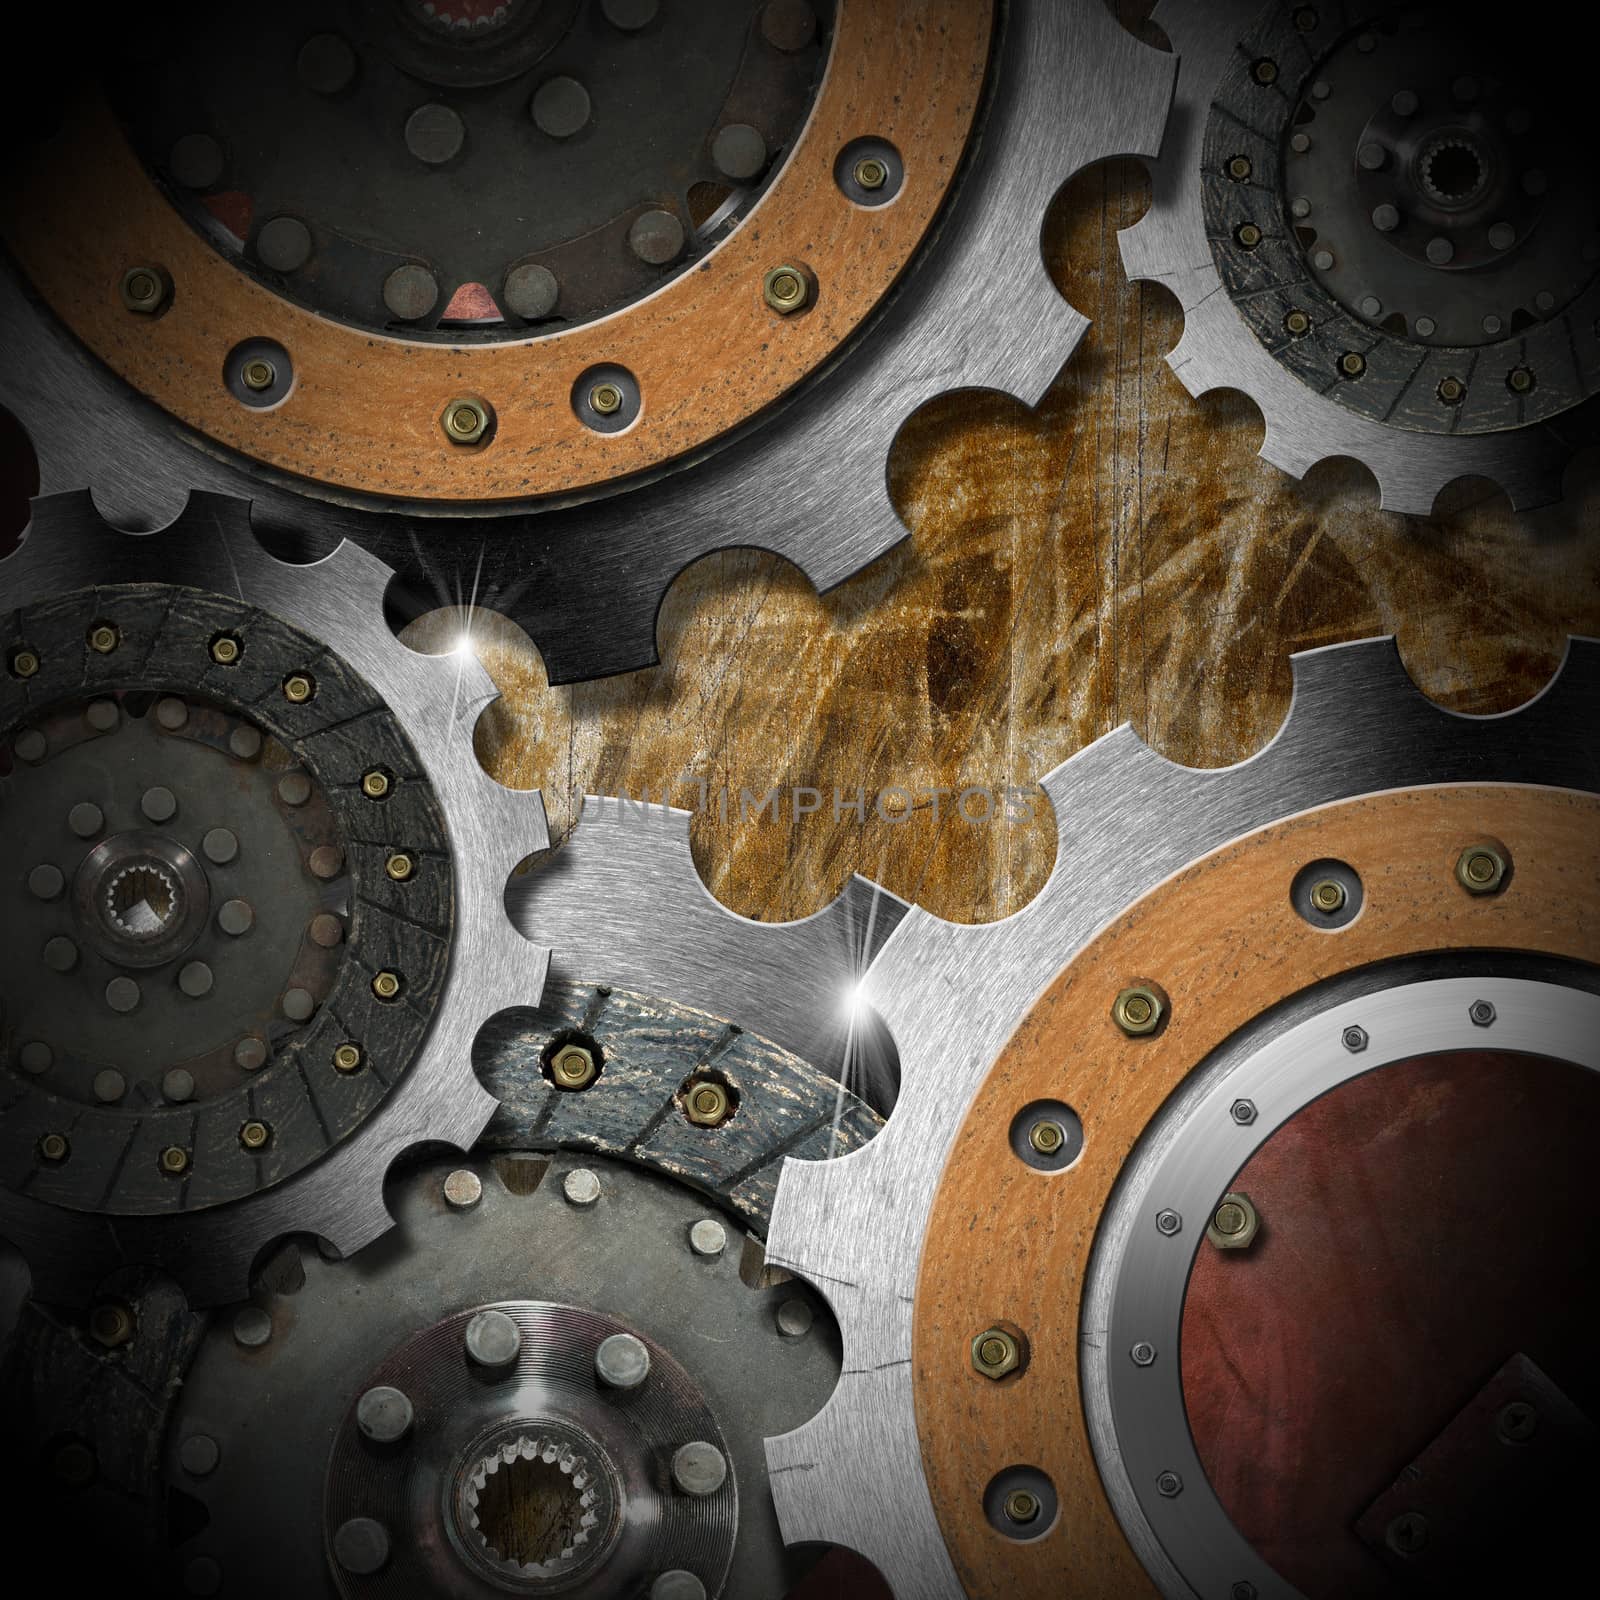 Mechanical template with metallic gears on brown grunge background

